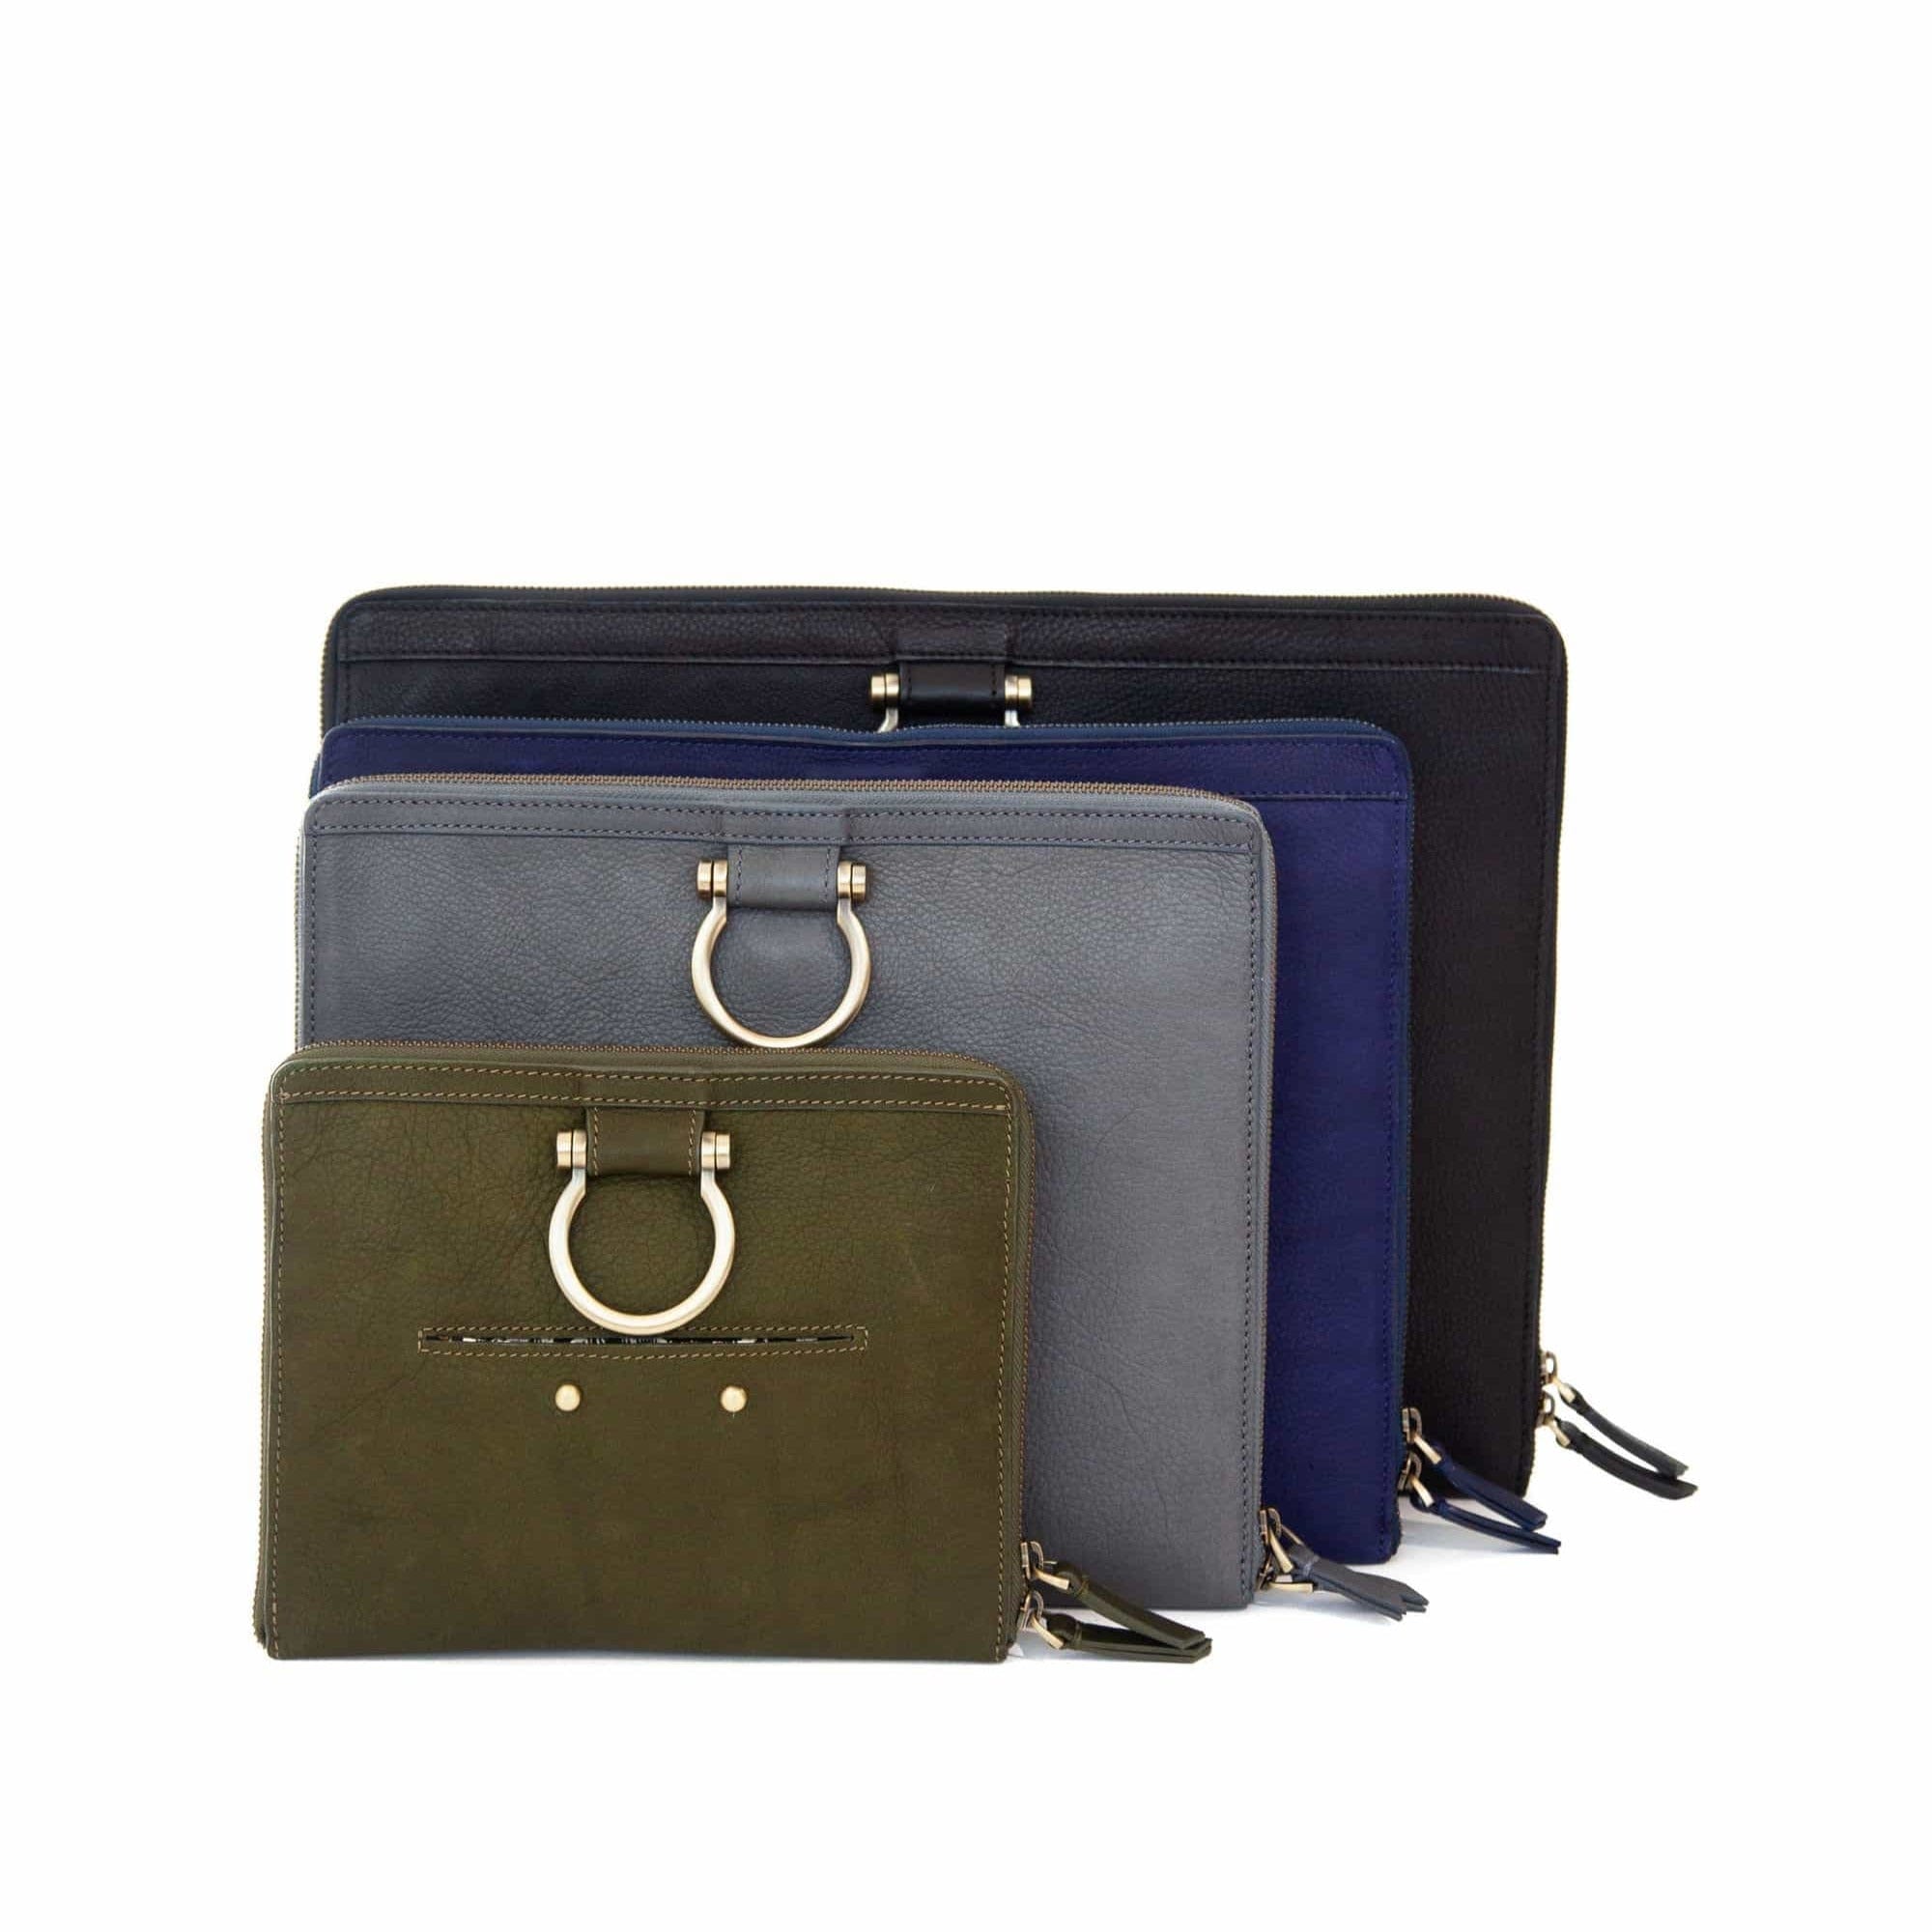 The M leather crossbody bags come in a variety of sizes because it’s a brand favorite year after year.